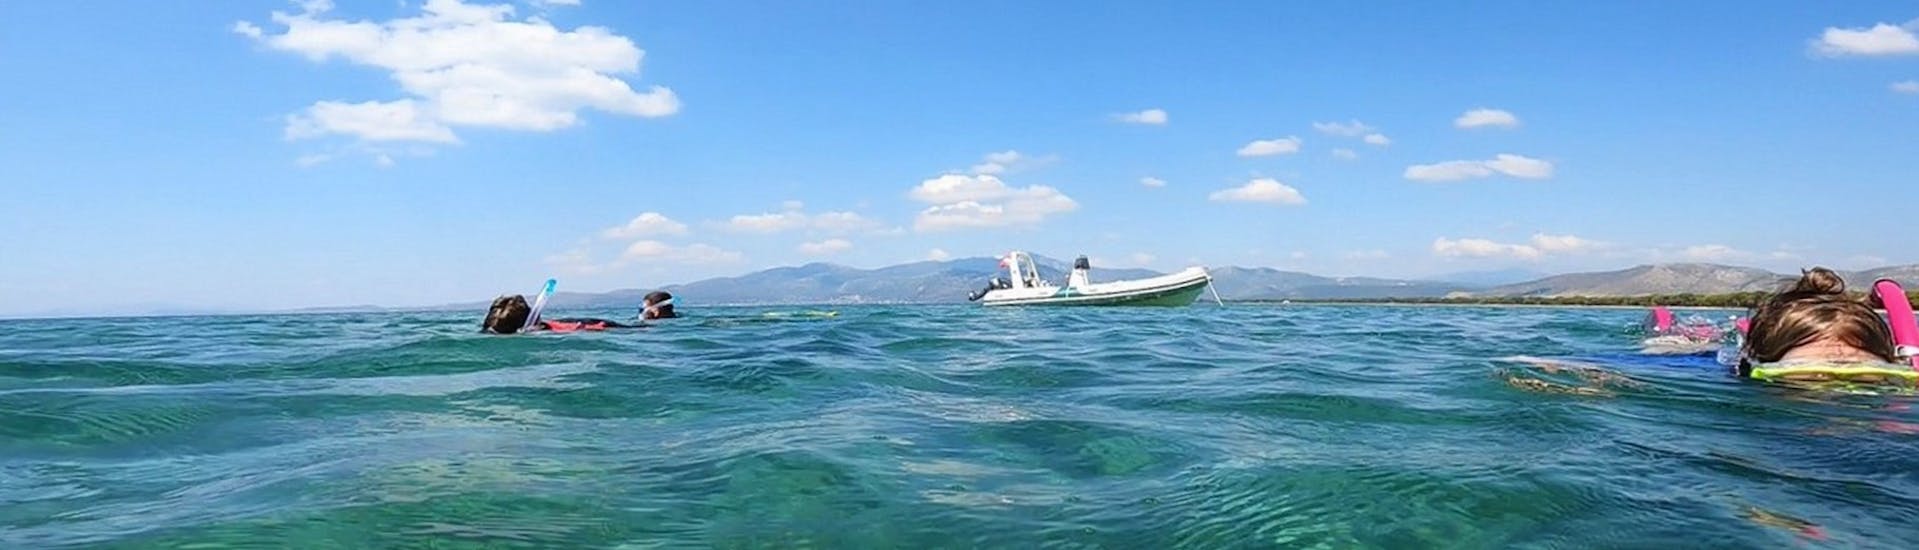 Boat on the water during the snorkeling near Athens - Nea Makri hosted by Kanelakis Diving Experiences.